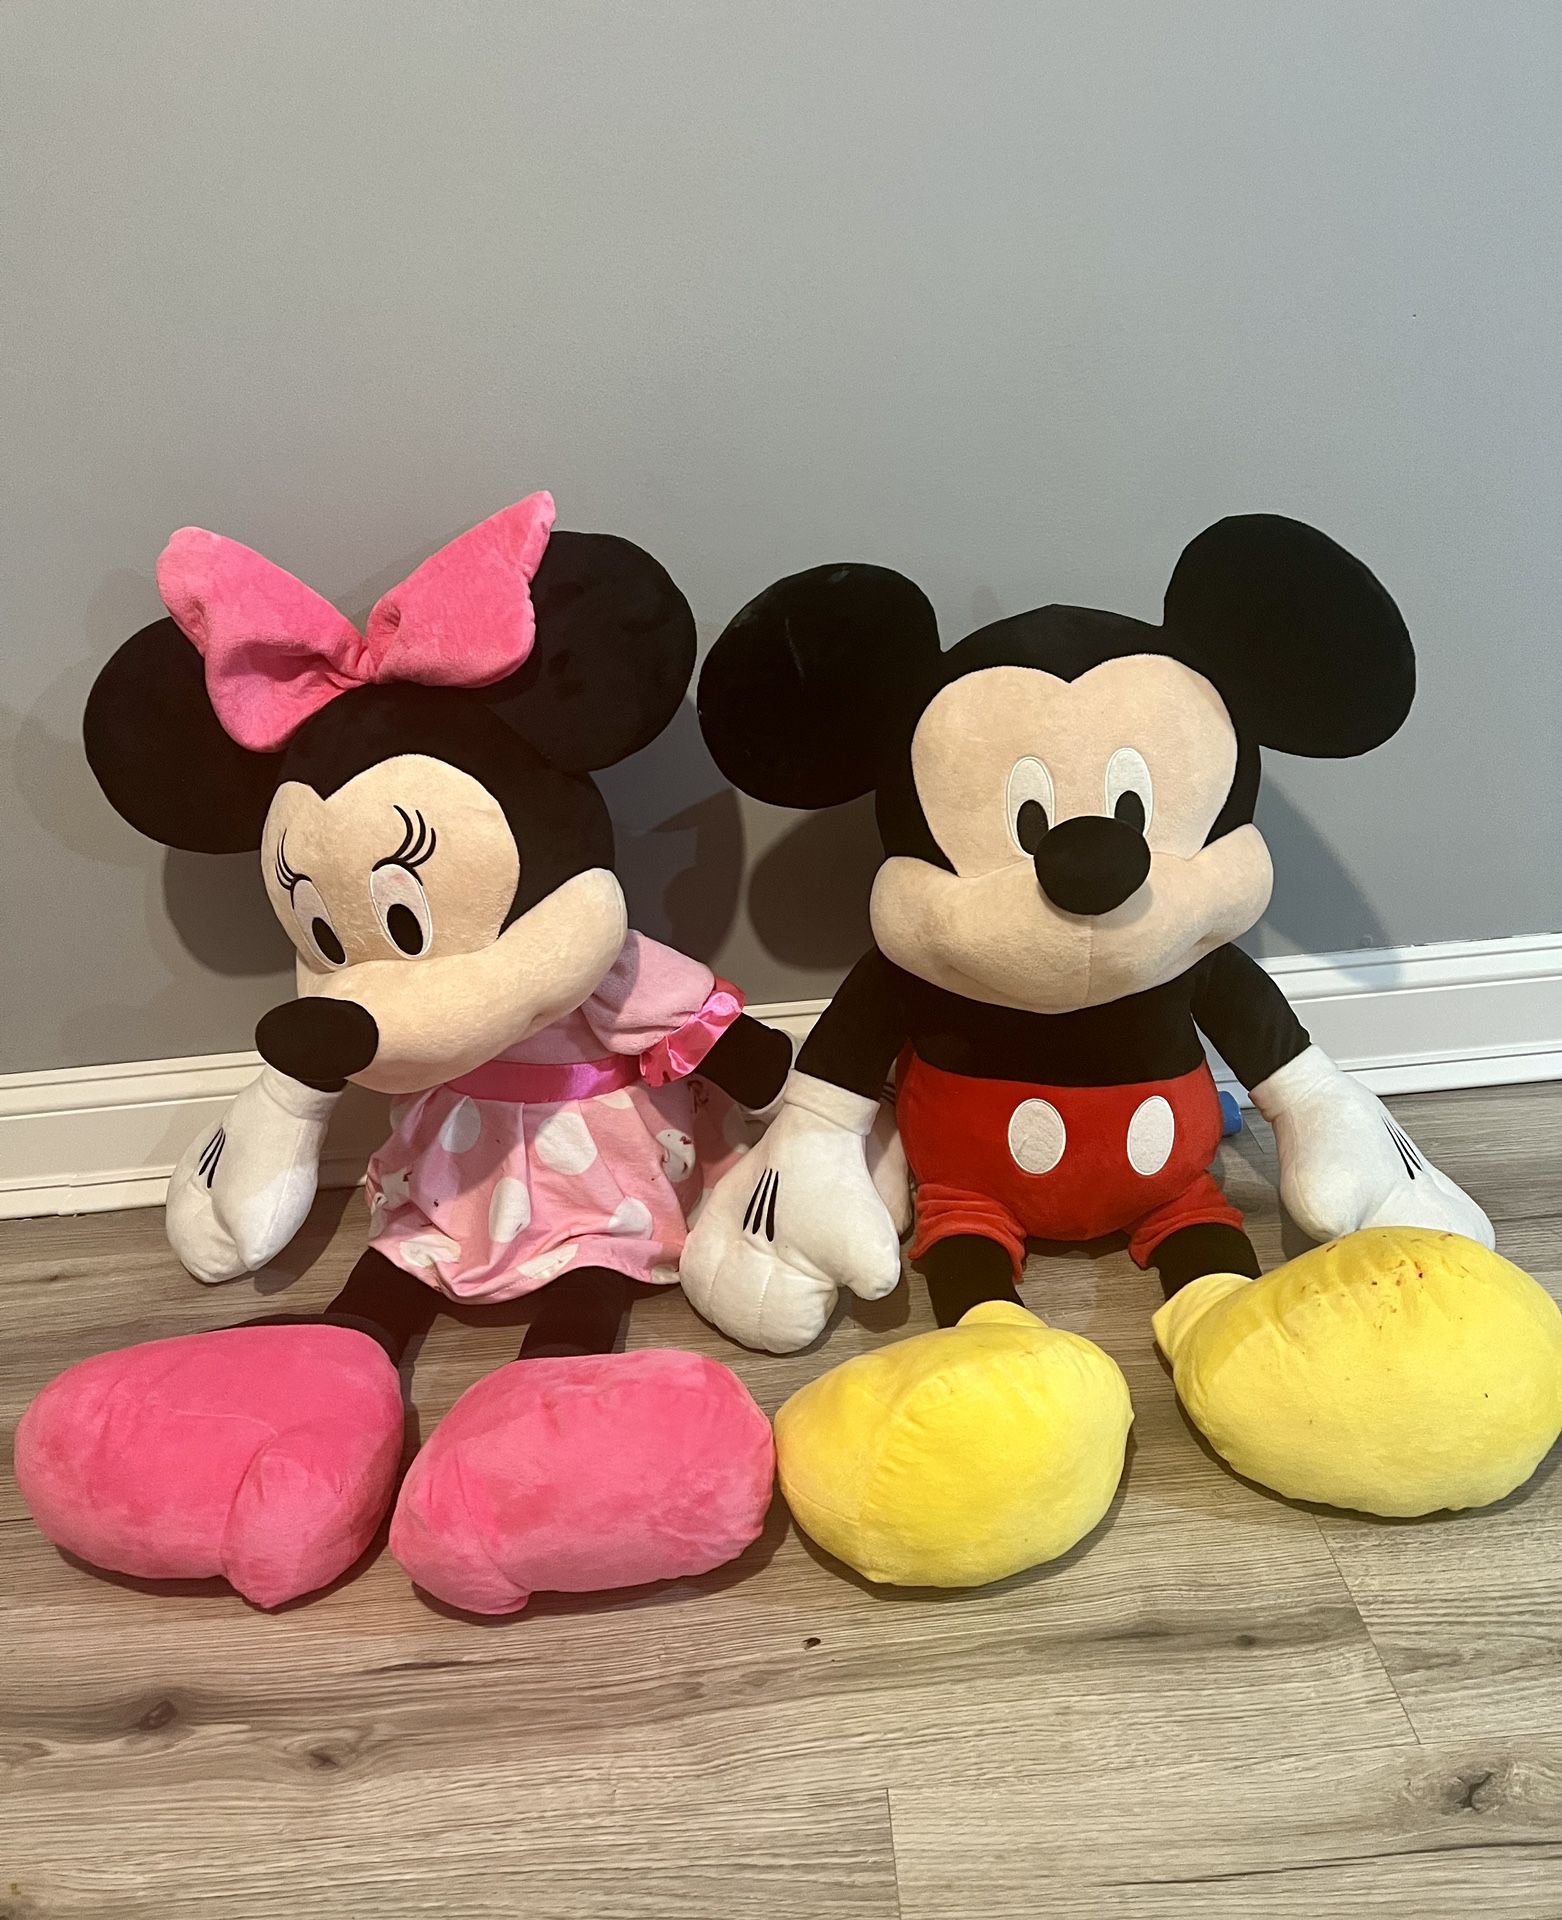 Disney Junior Mickey Mouse 40 Inch Giant Plush Minnie And MickeyMouse Stuffed Animal for Kids 2